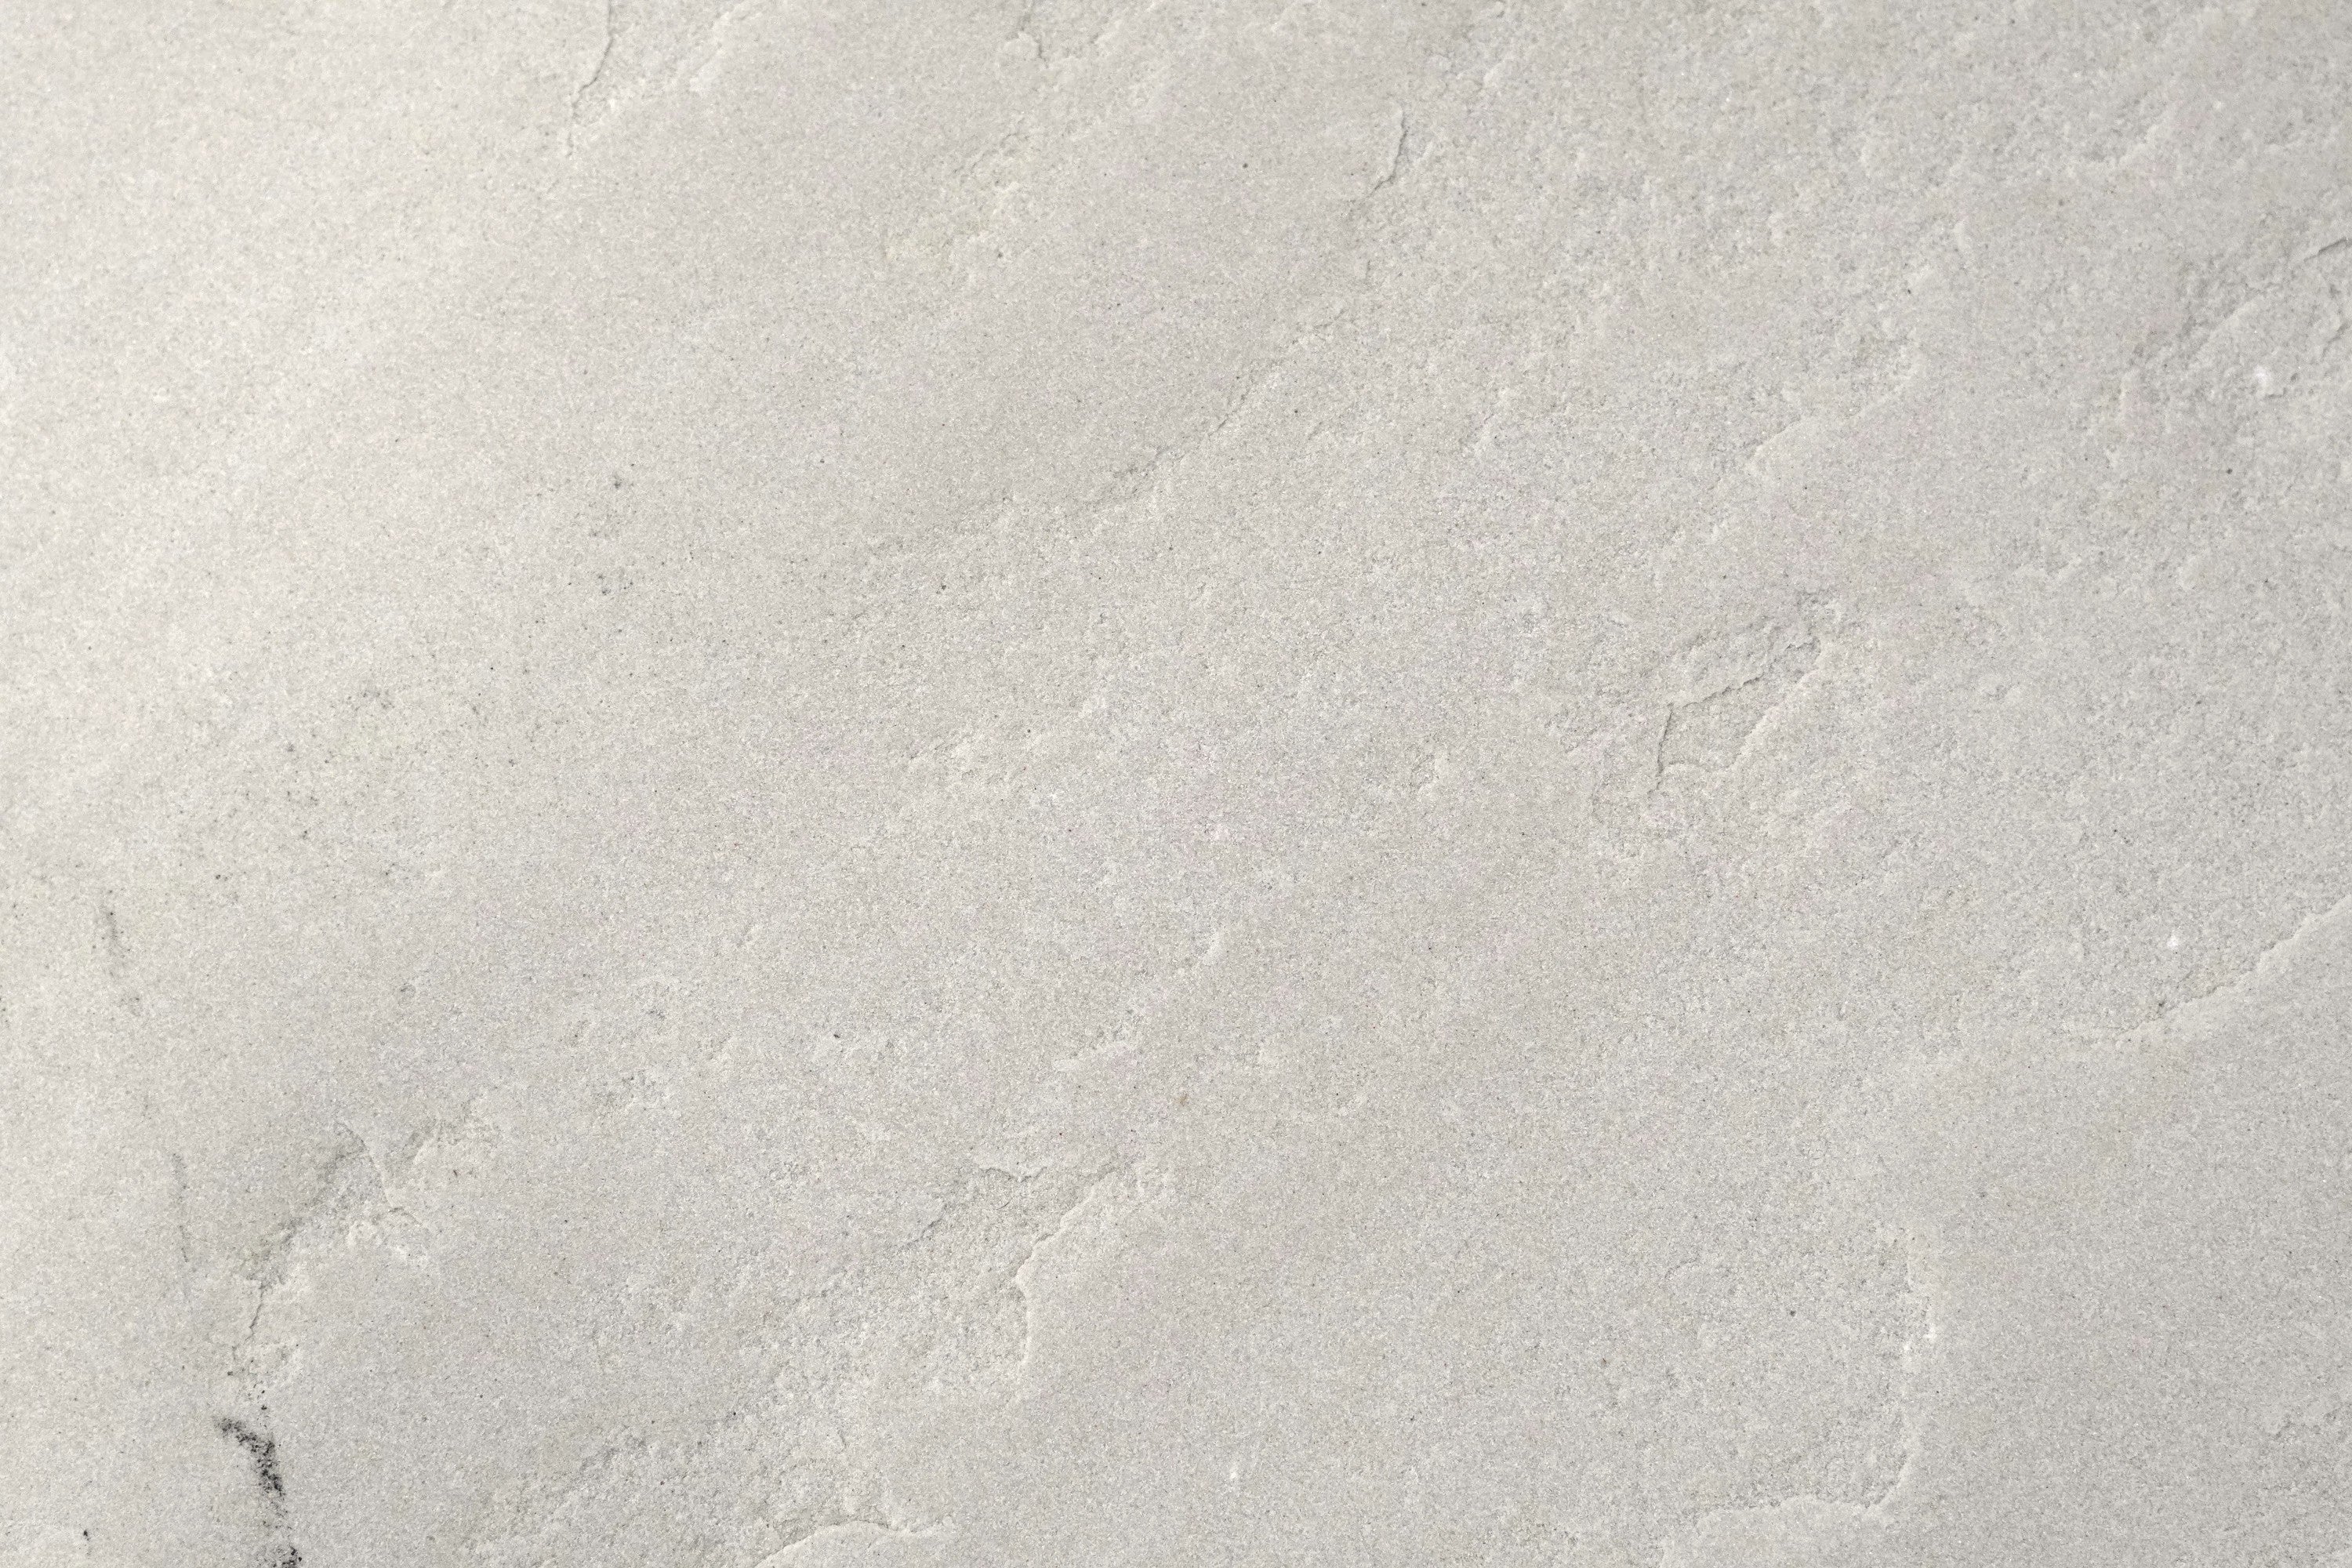 beige antiqued natural limestone field tile biarritz beige width of 16 length of 32 and thickness of 0.75 sold to you by surface group international